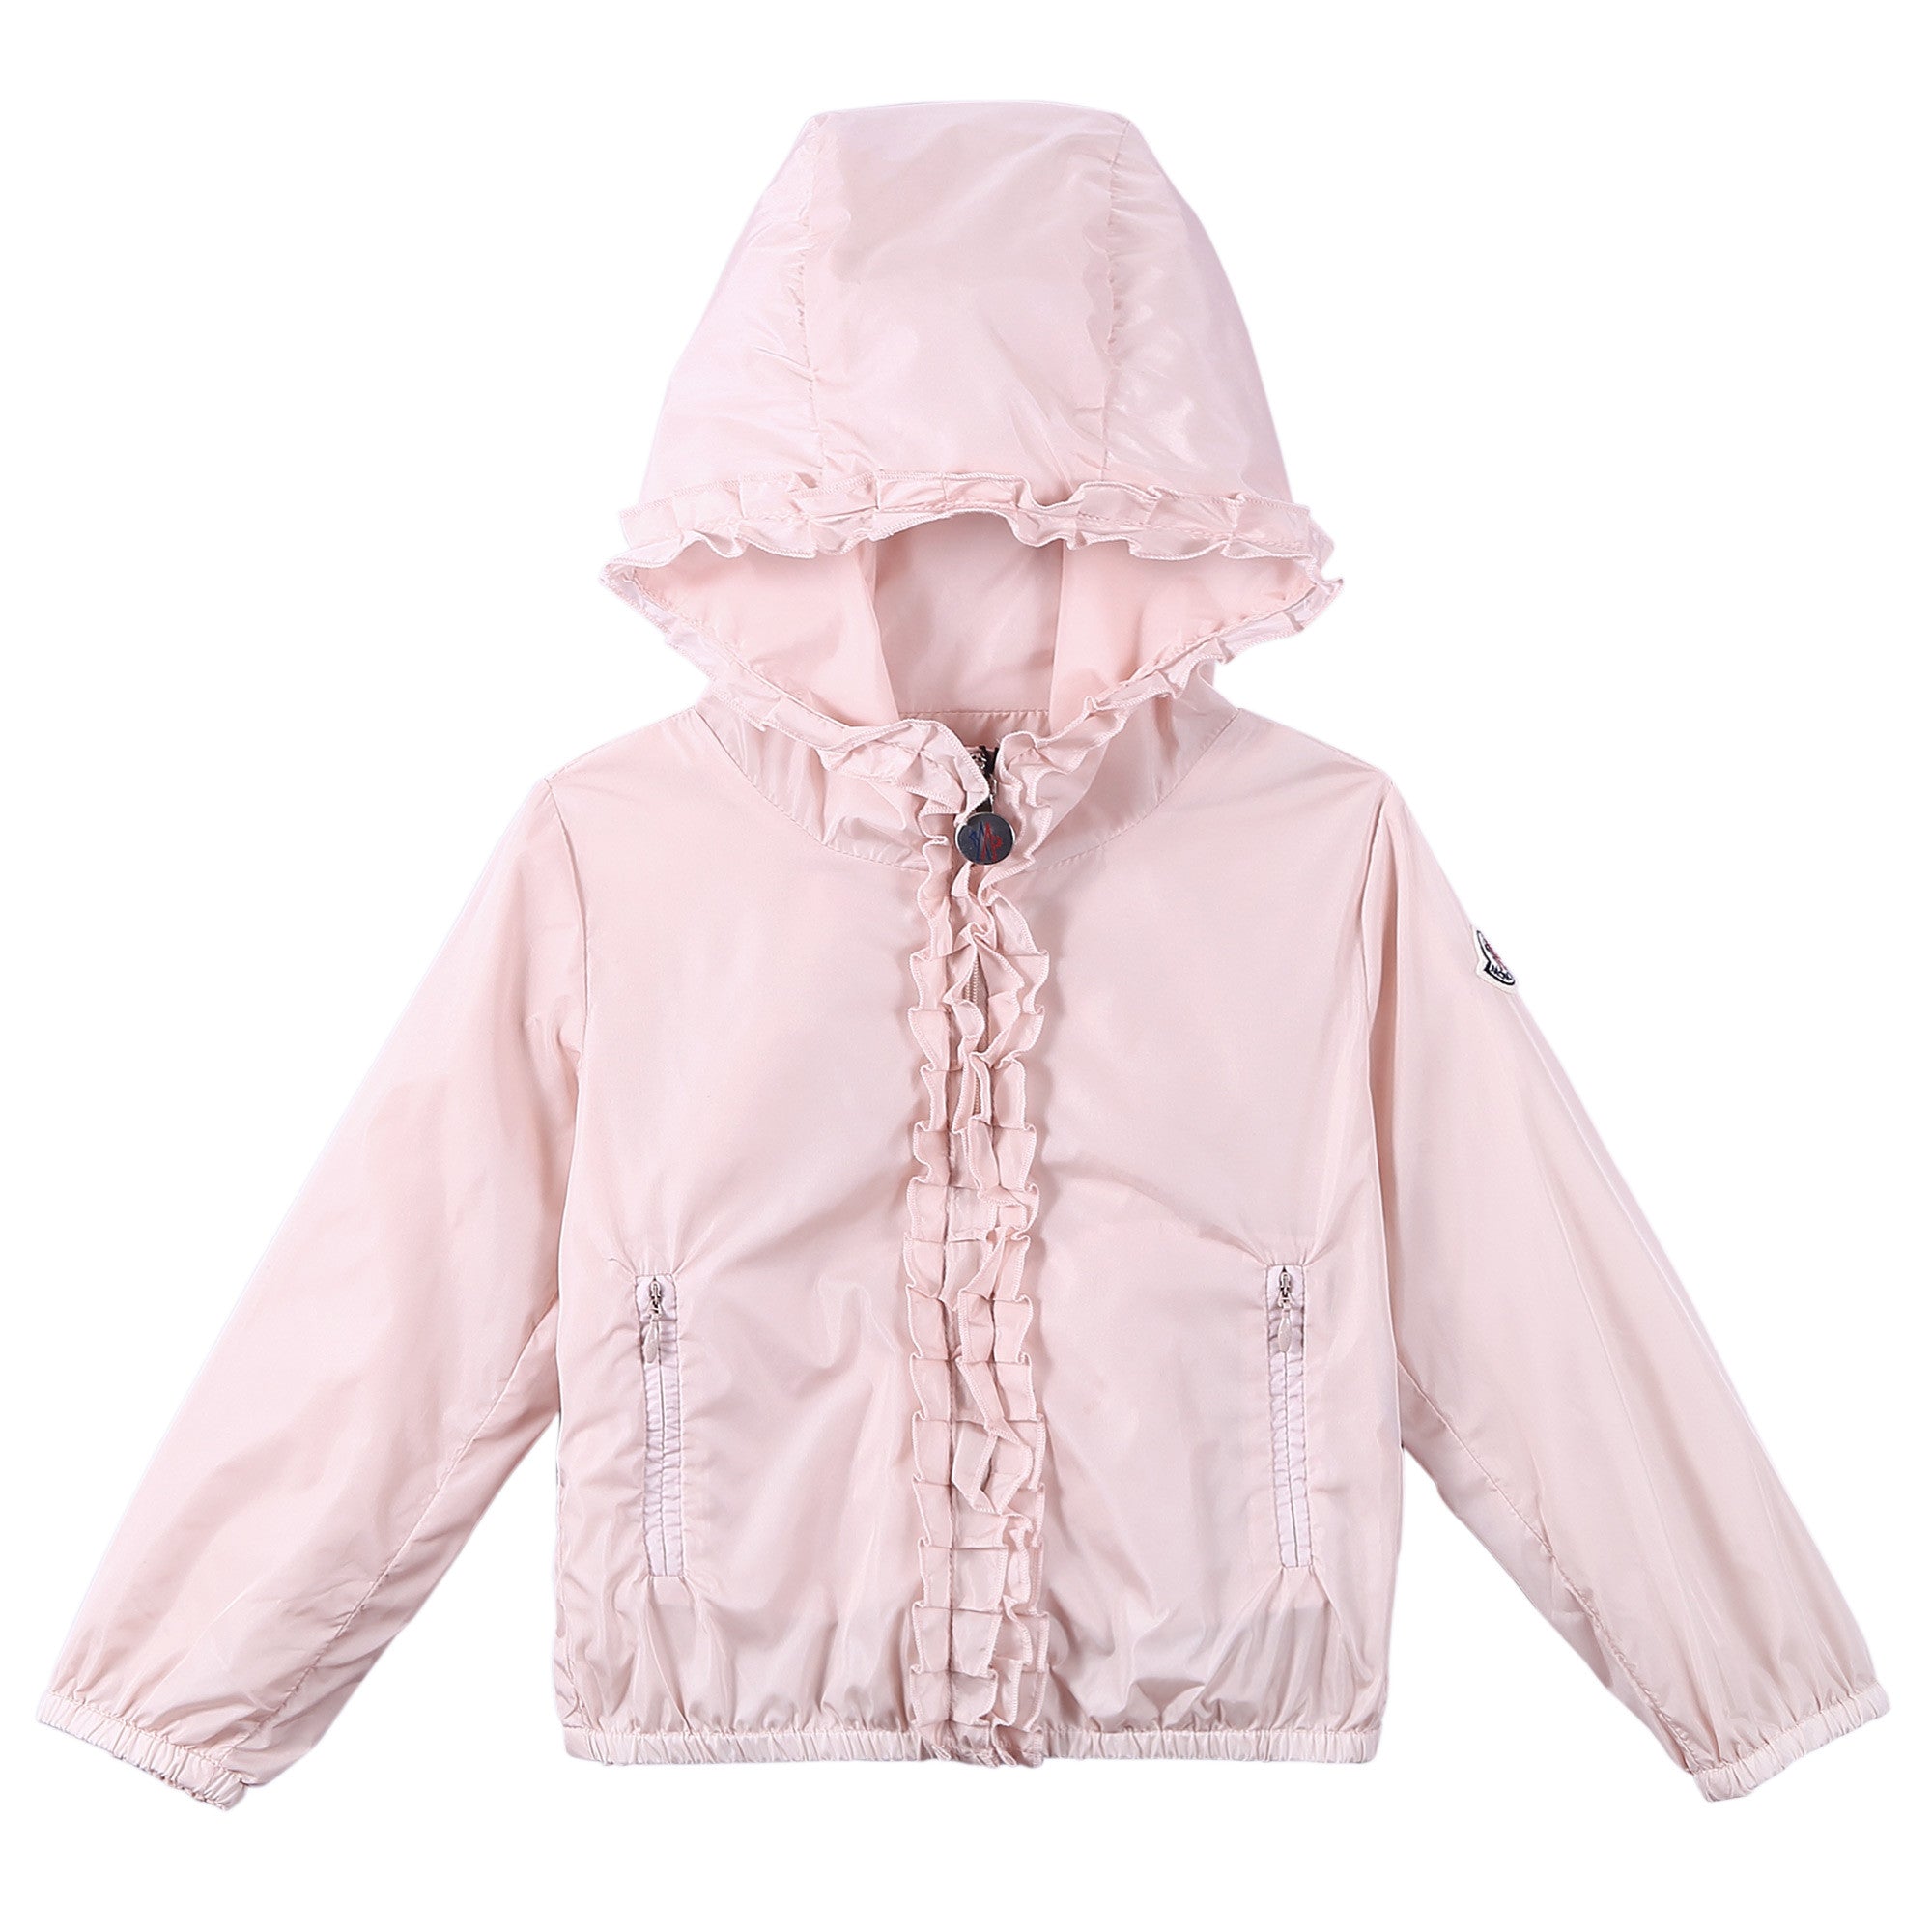 Baby Girls Bright Pink Frilly Hooded 'Darma' Zip-Up Tops - CÉMAROSE | Children's Fashion Store - 1